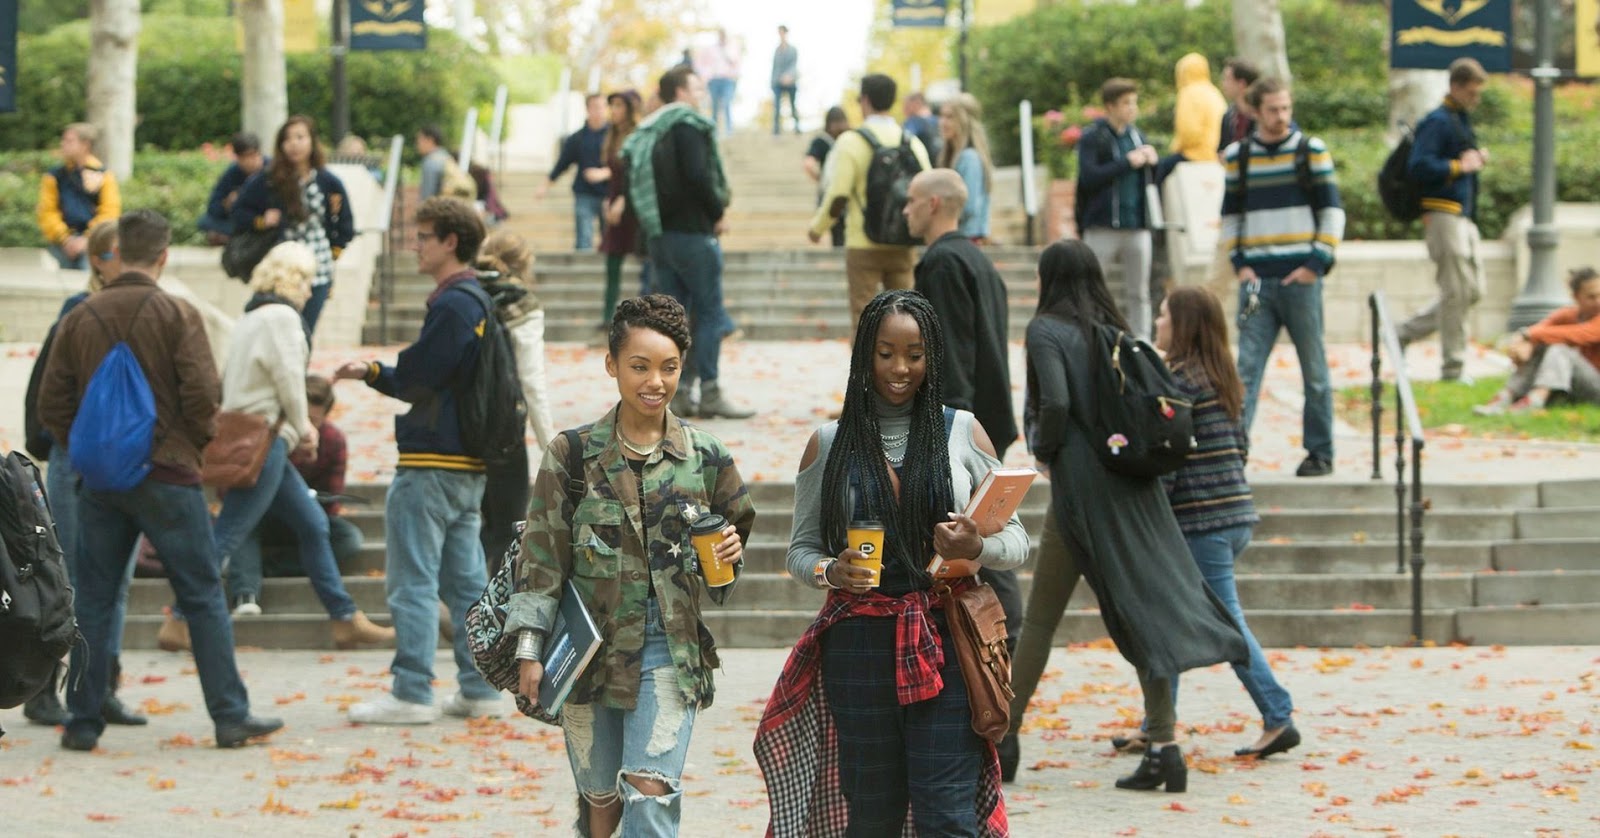 🎓 Spend a Day in College and We’ll Give You a Netflix Show to Binge Watch Next Dear White People Campus